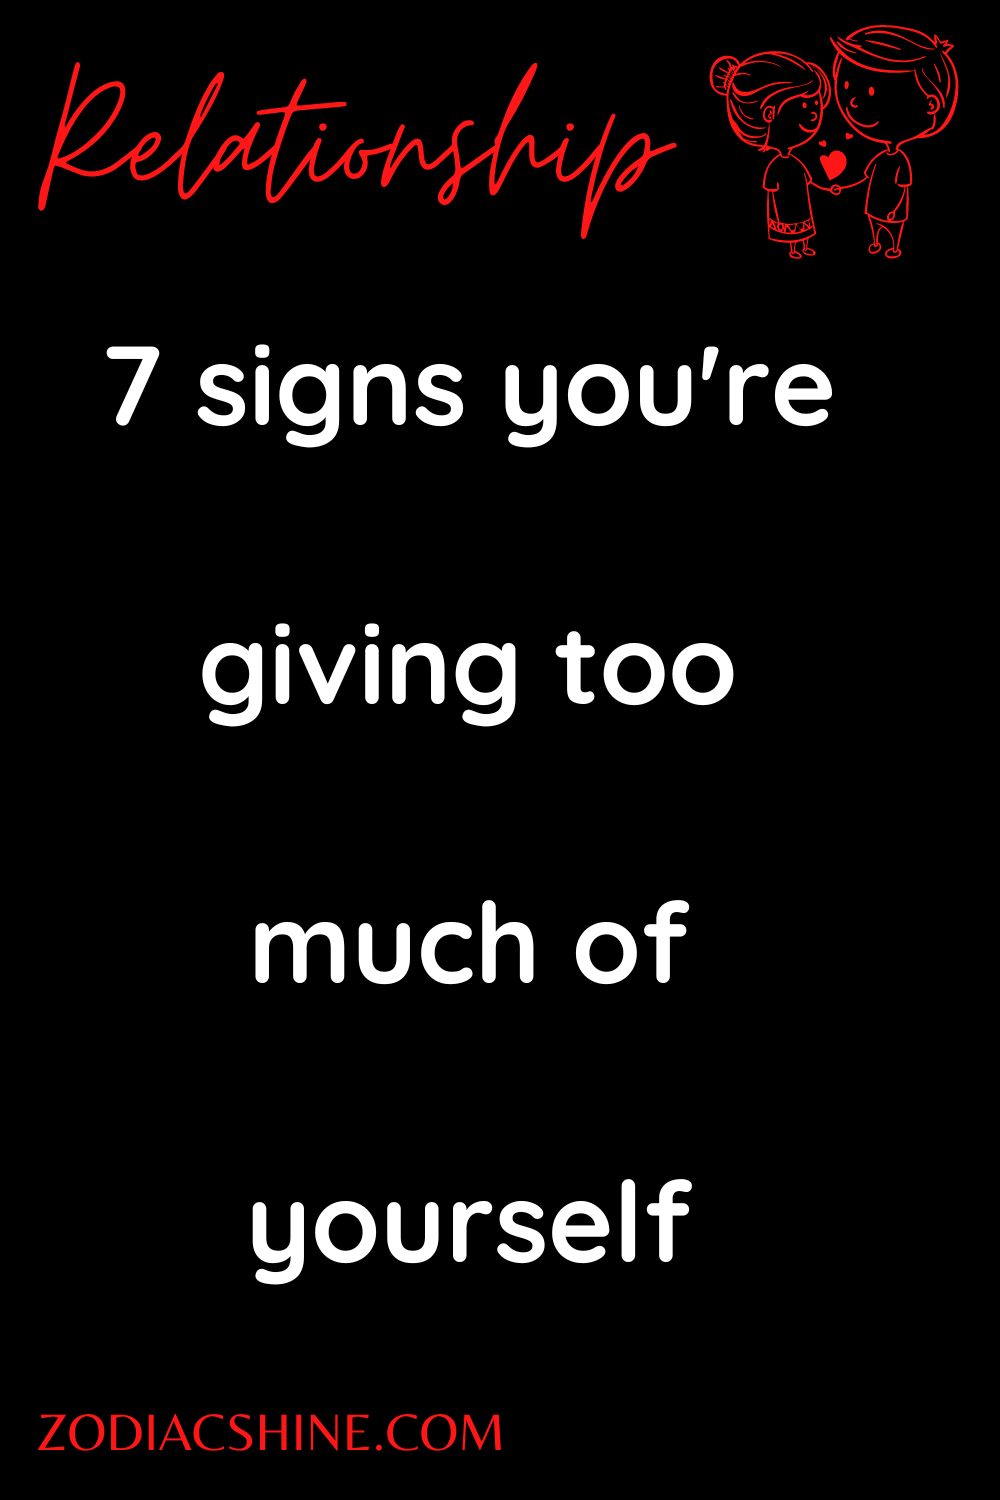 7 signs you're giving too much of yourself